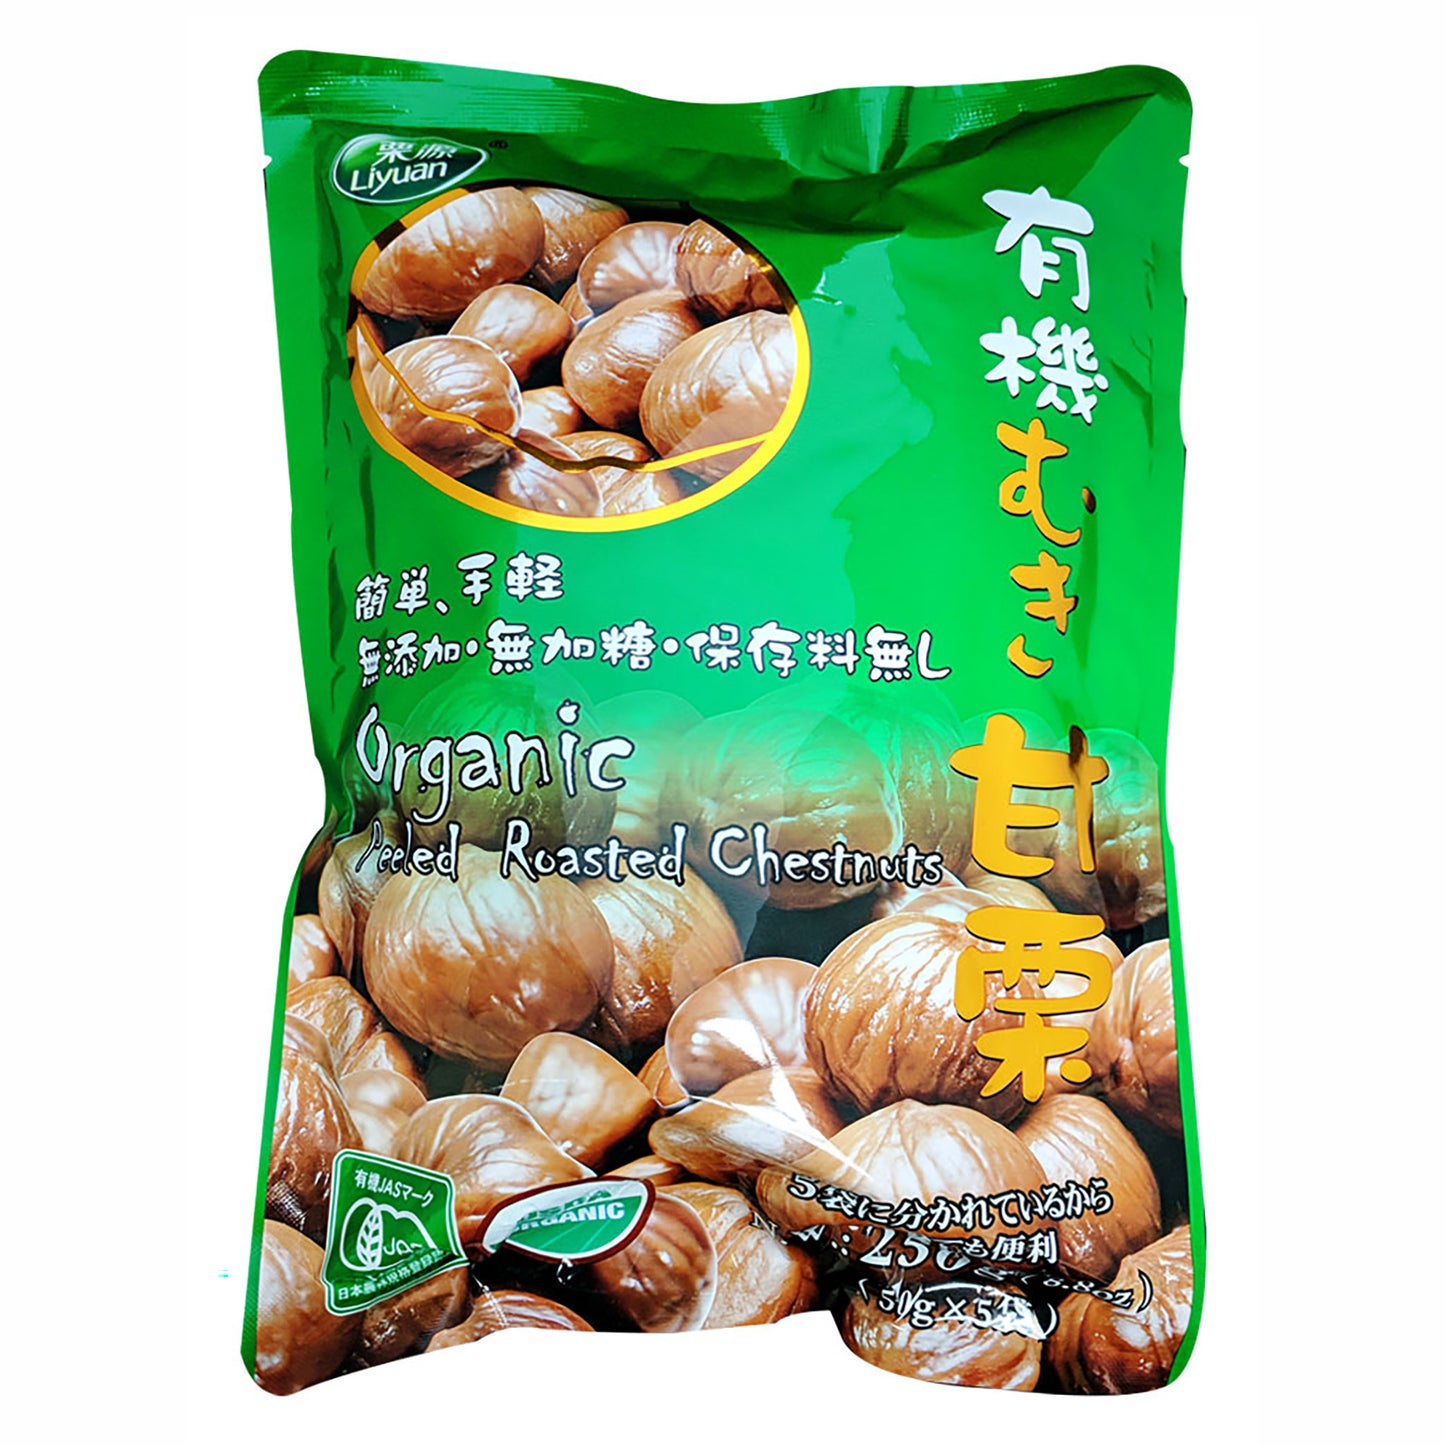 Front graphic image of Liyuan Organic Chestnuts 8.8oz